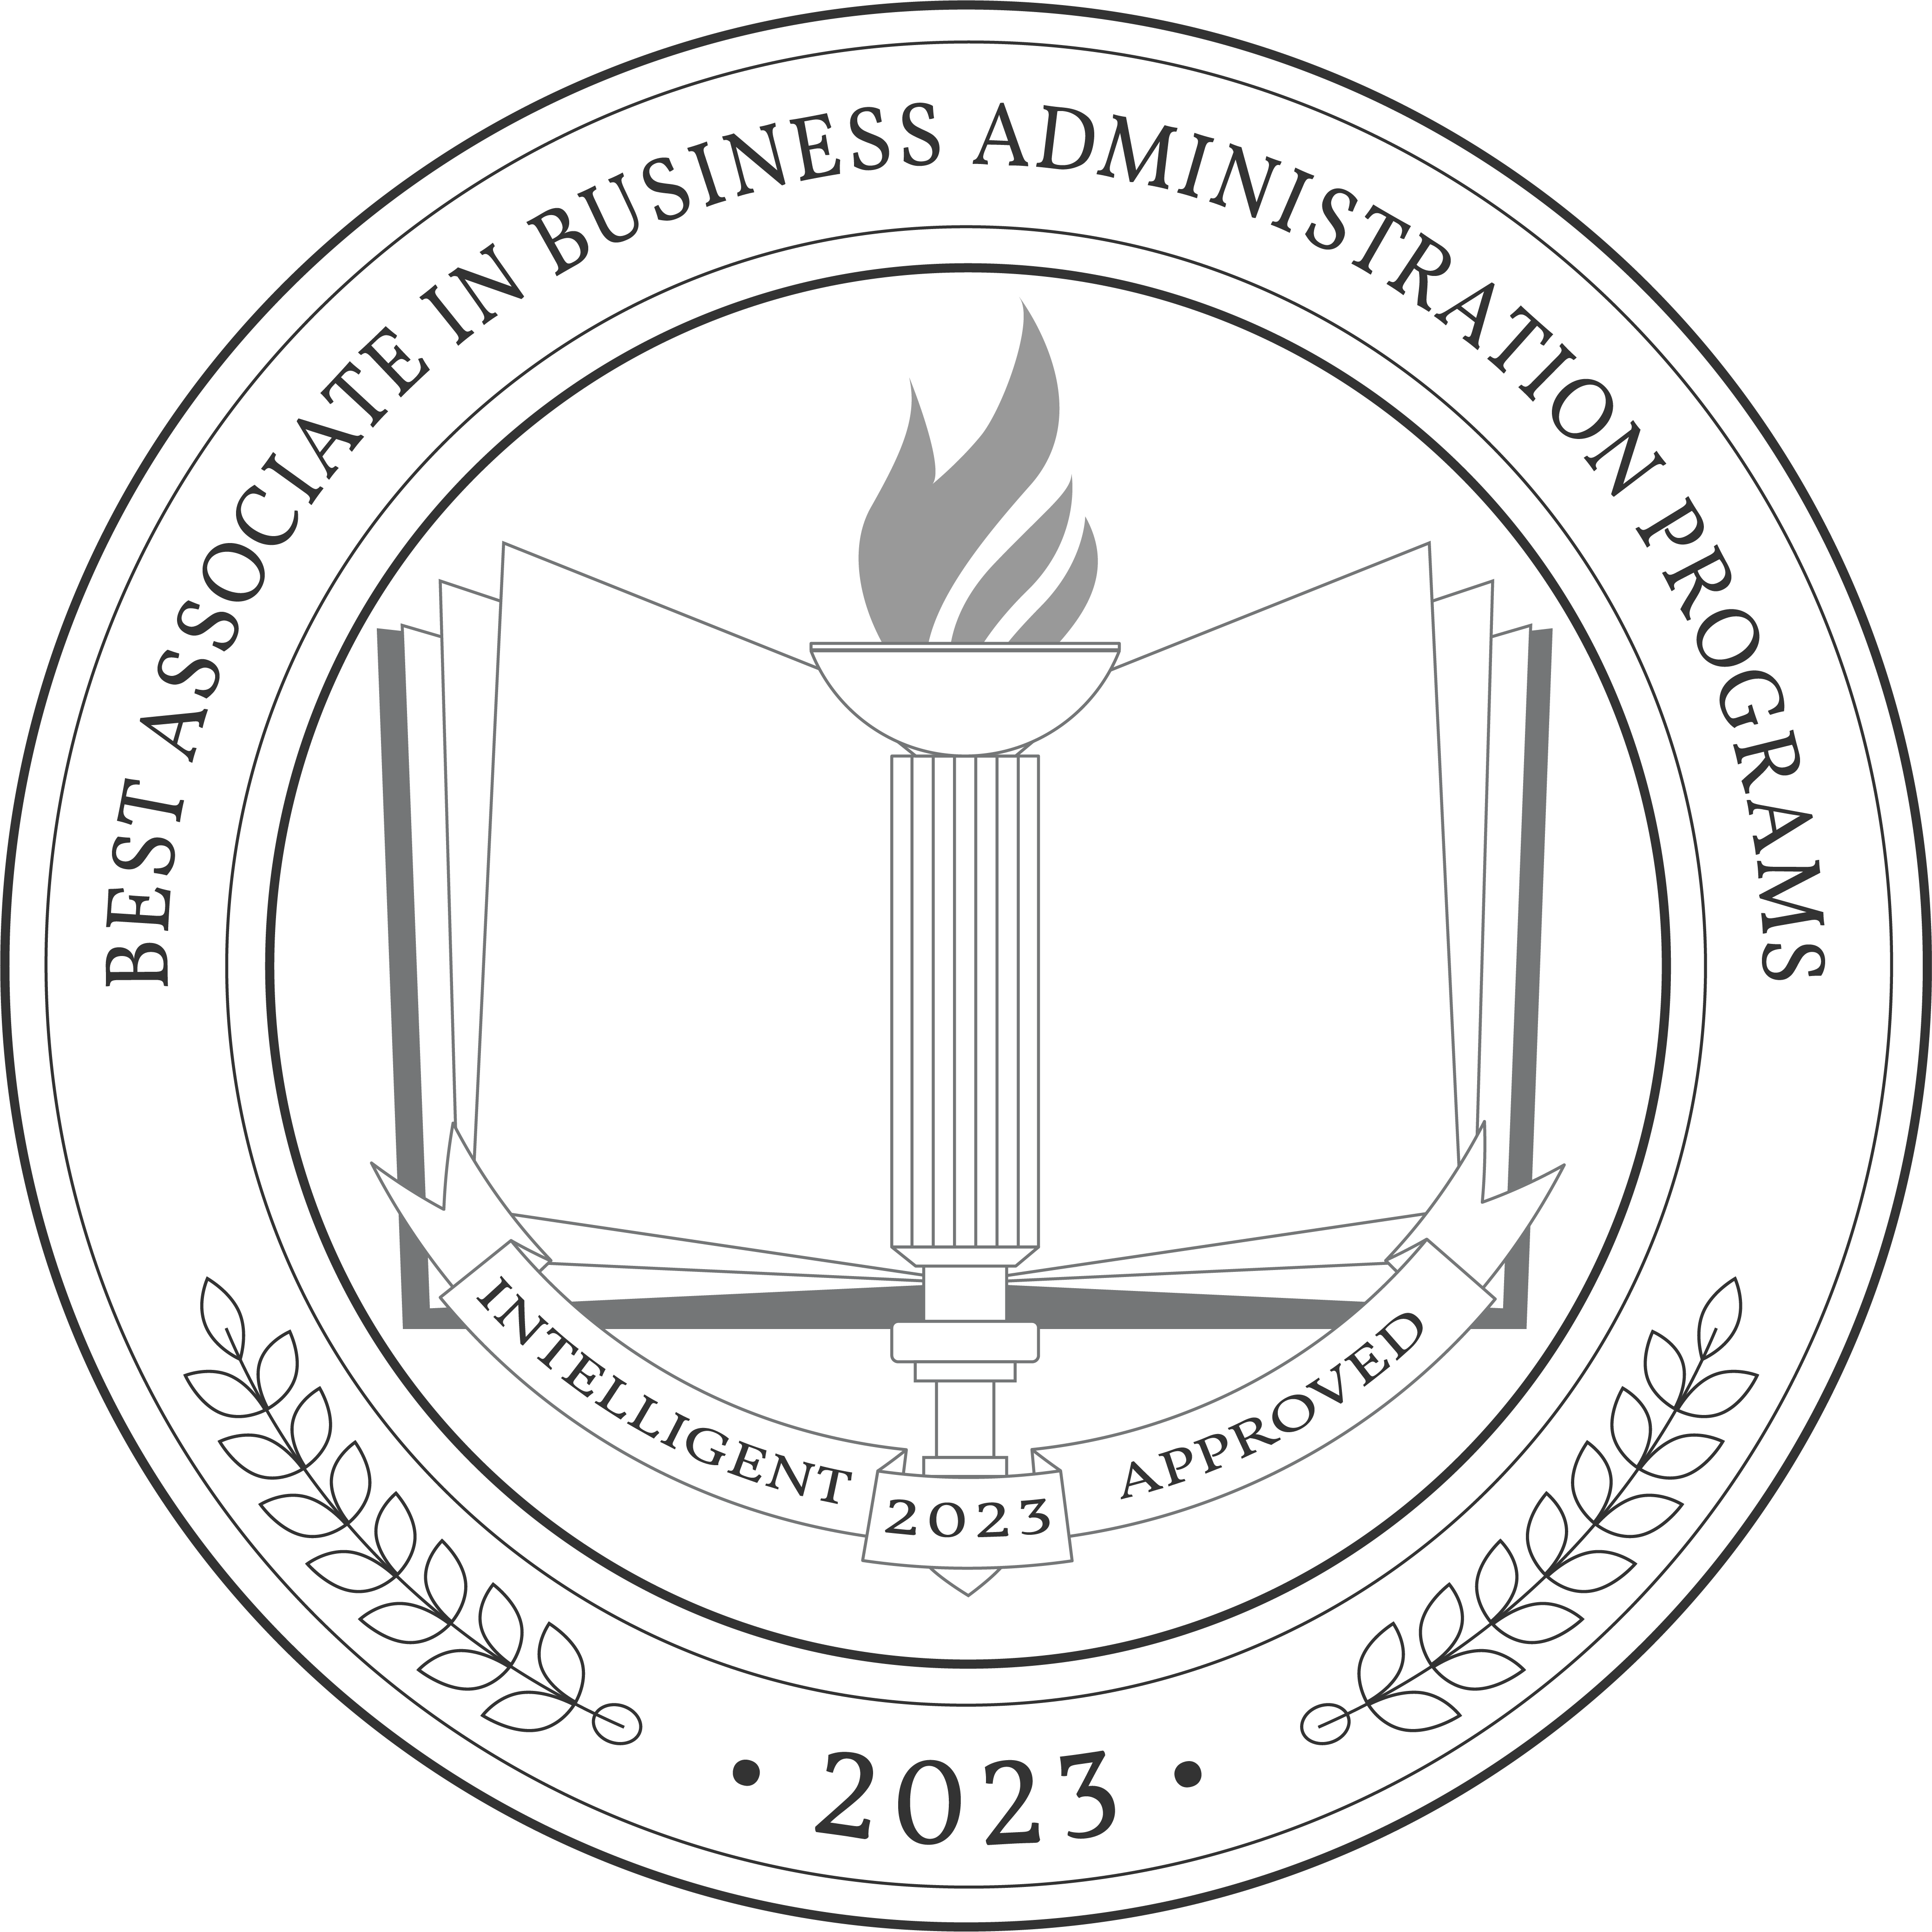 Best Associate in Business Administration Programs badge